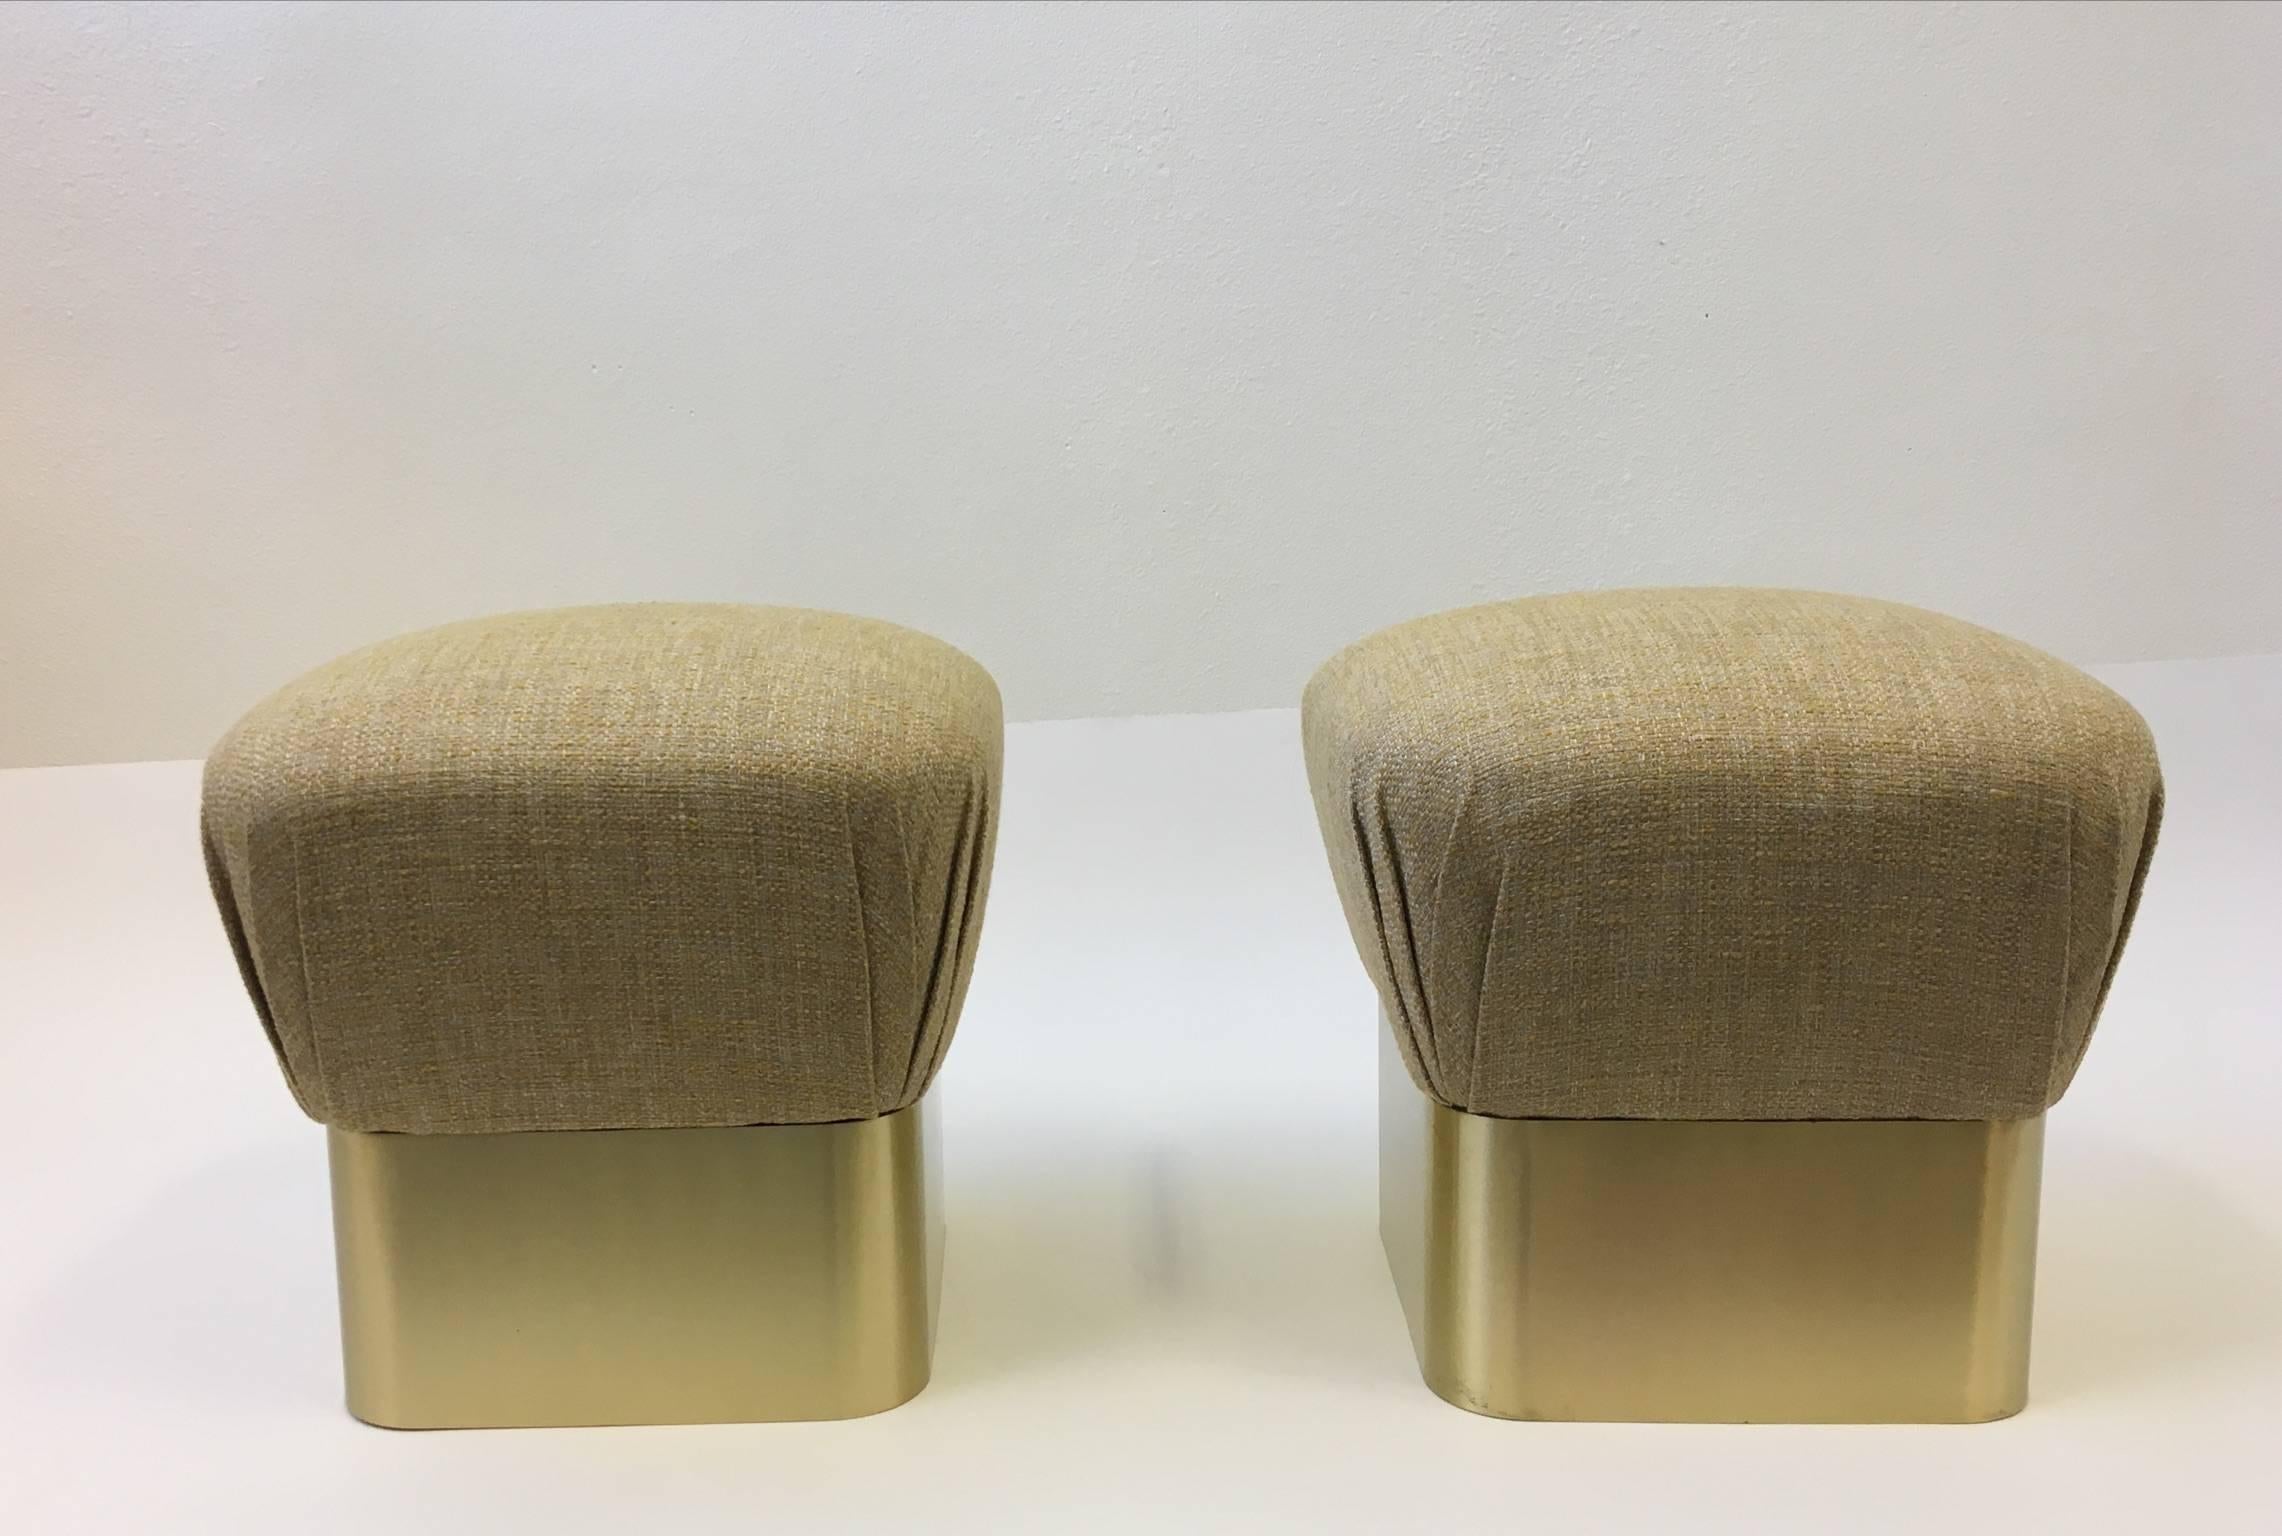 Pair of glamorous poufs designed by Sally Sirkin Lewis for J Robert Scott in the 1980s.
The bottom base is wood with thick satin brass.
Newly reupholstered in a beautiful nubby fabric. Please see detail photos.

Dimension: 18